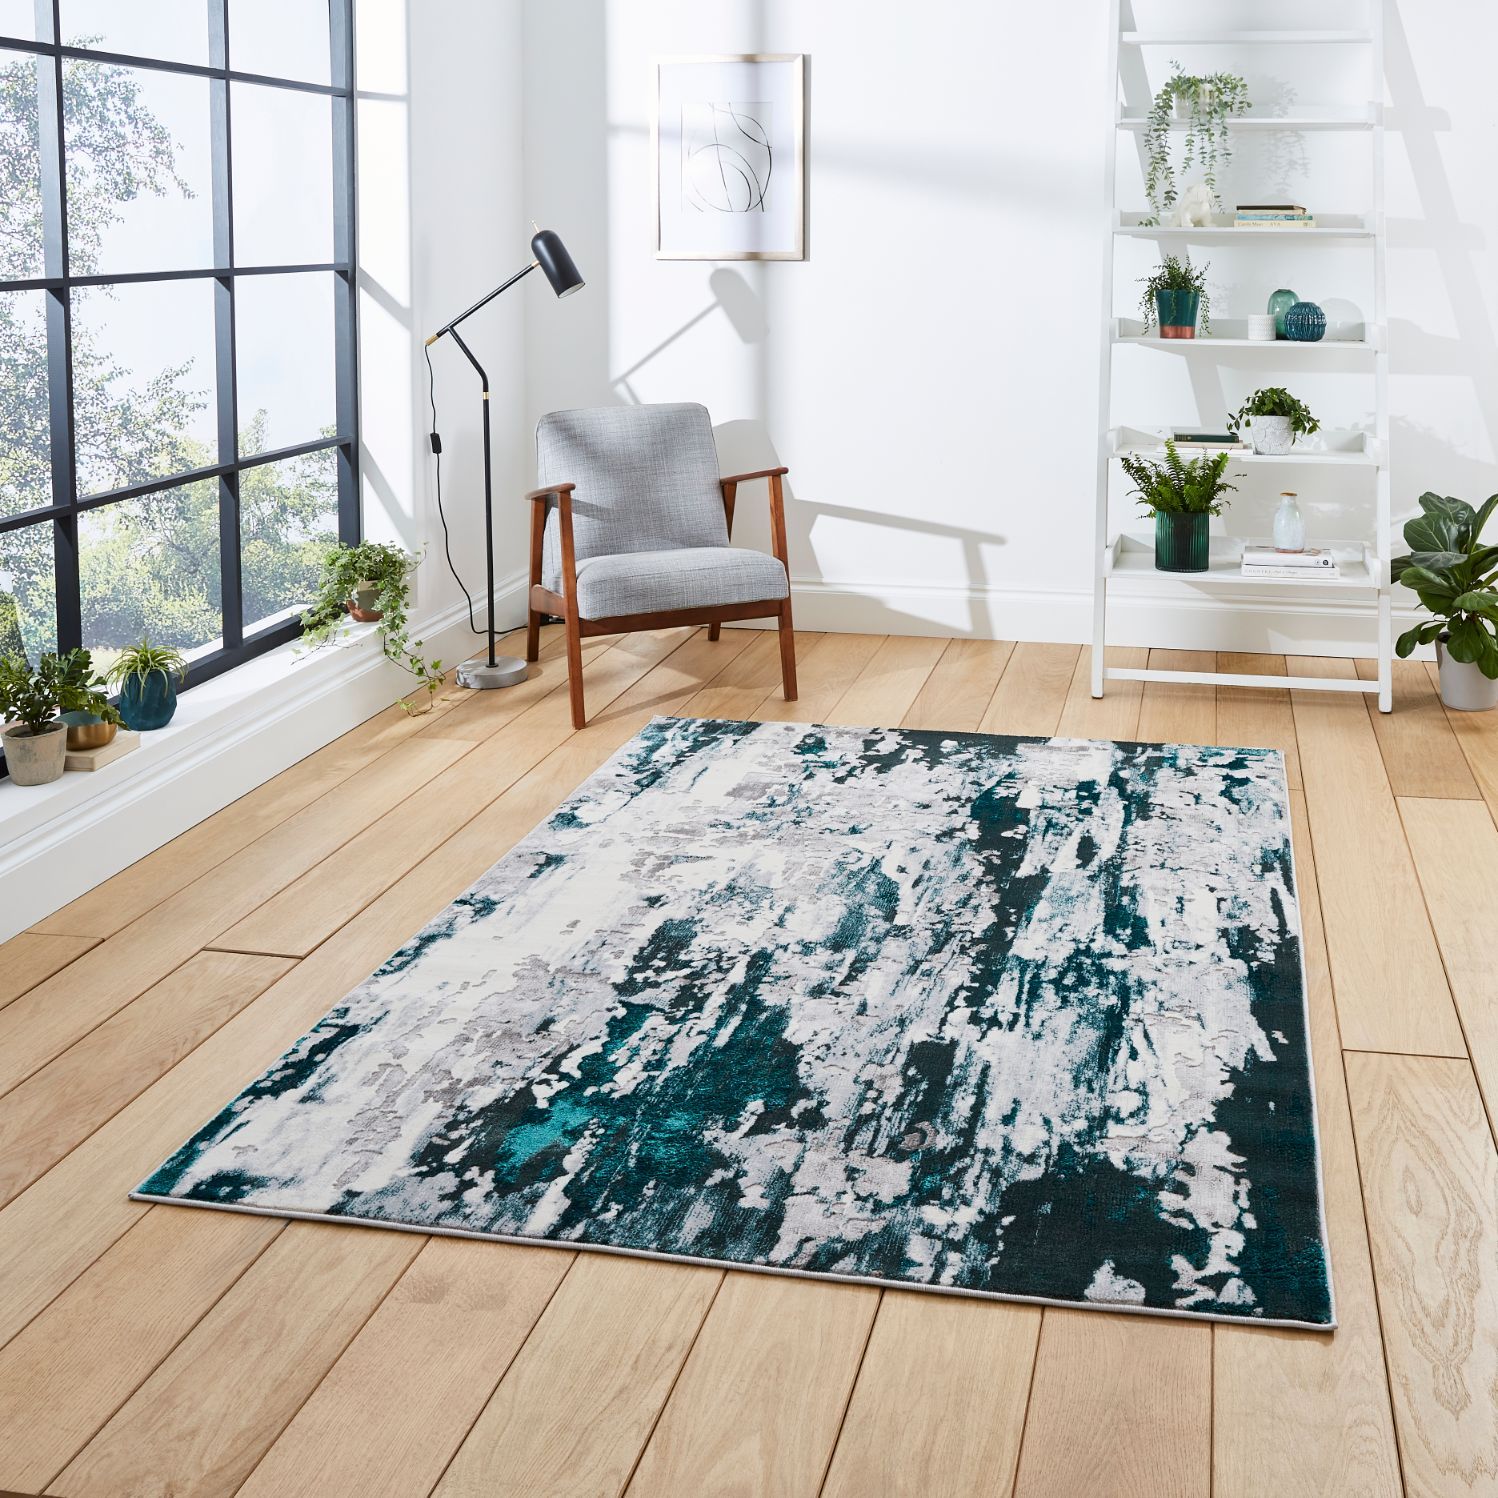 Apollo Think Gr580 Grey Green Rugs – Buy Gr580 Grey Green Rugs Online From  Rugs Direct For Apollo Rugs (View 4 of 15)